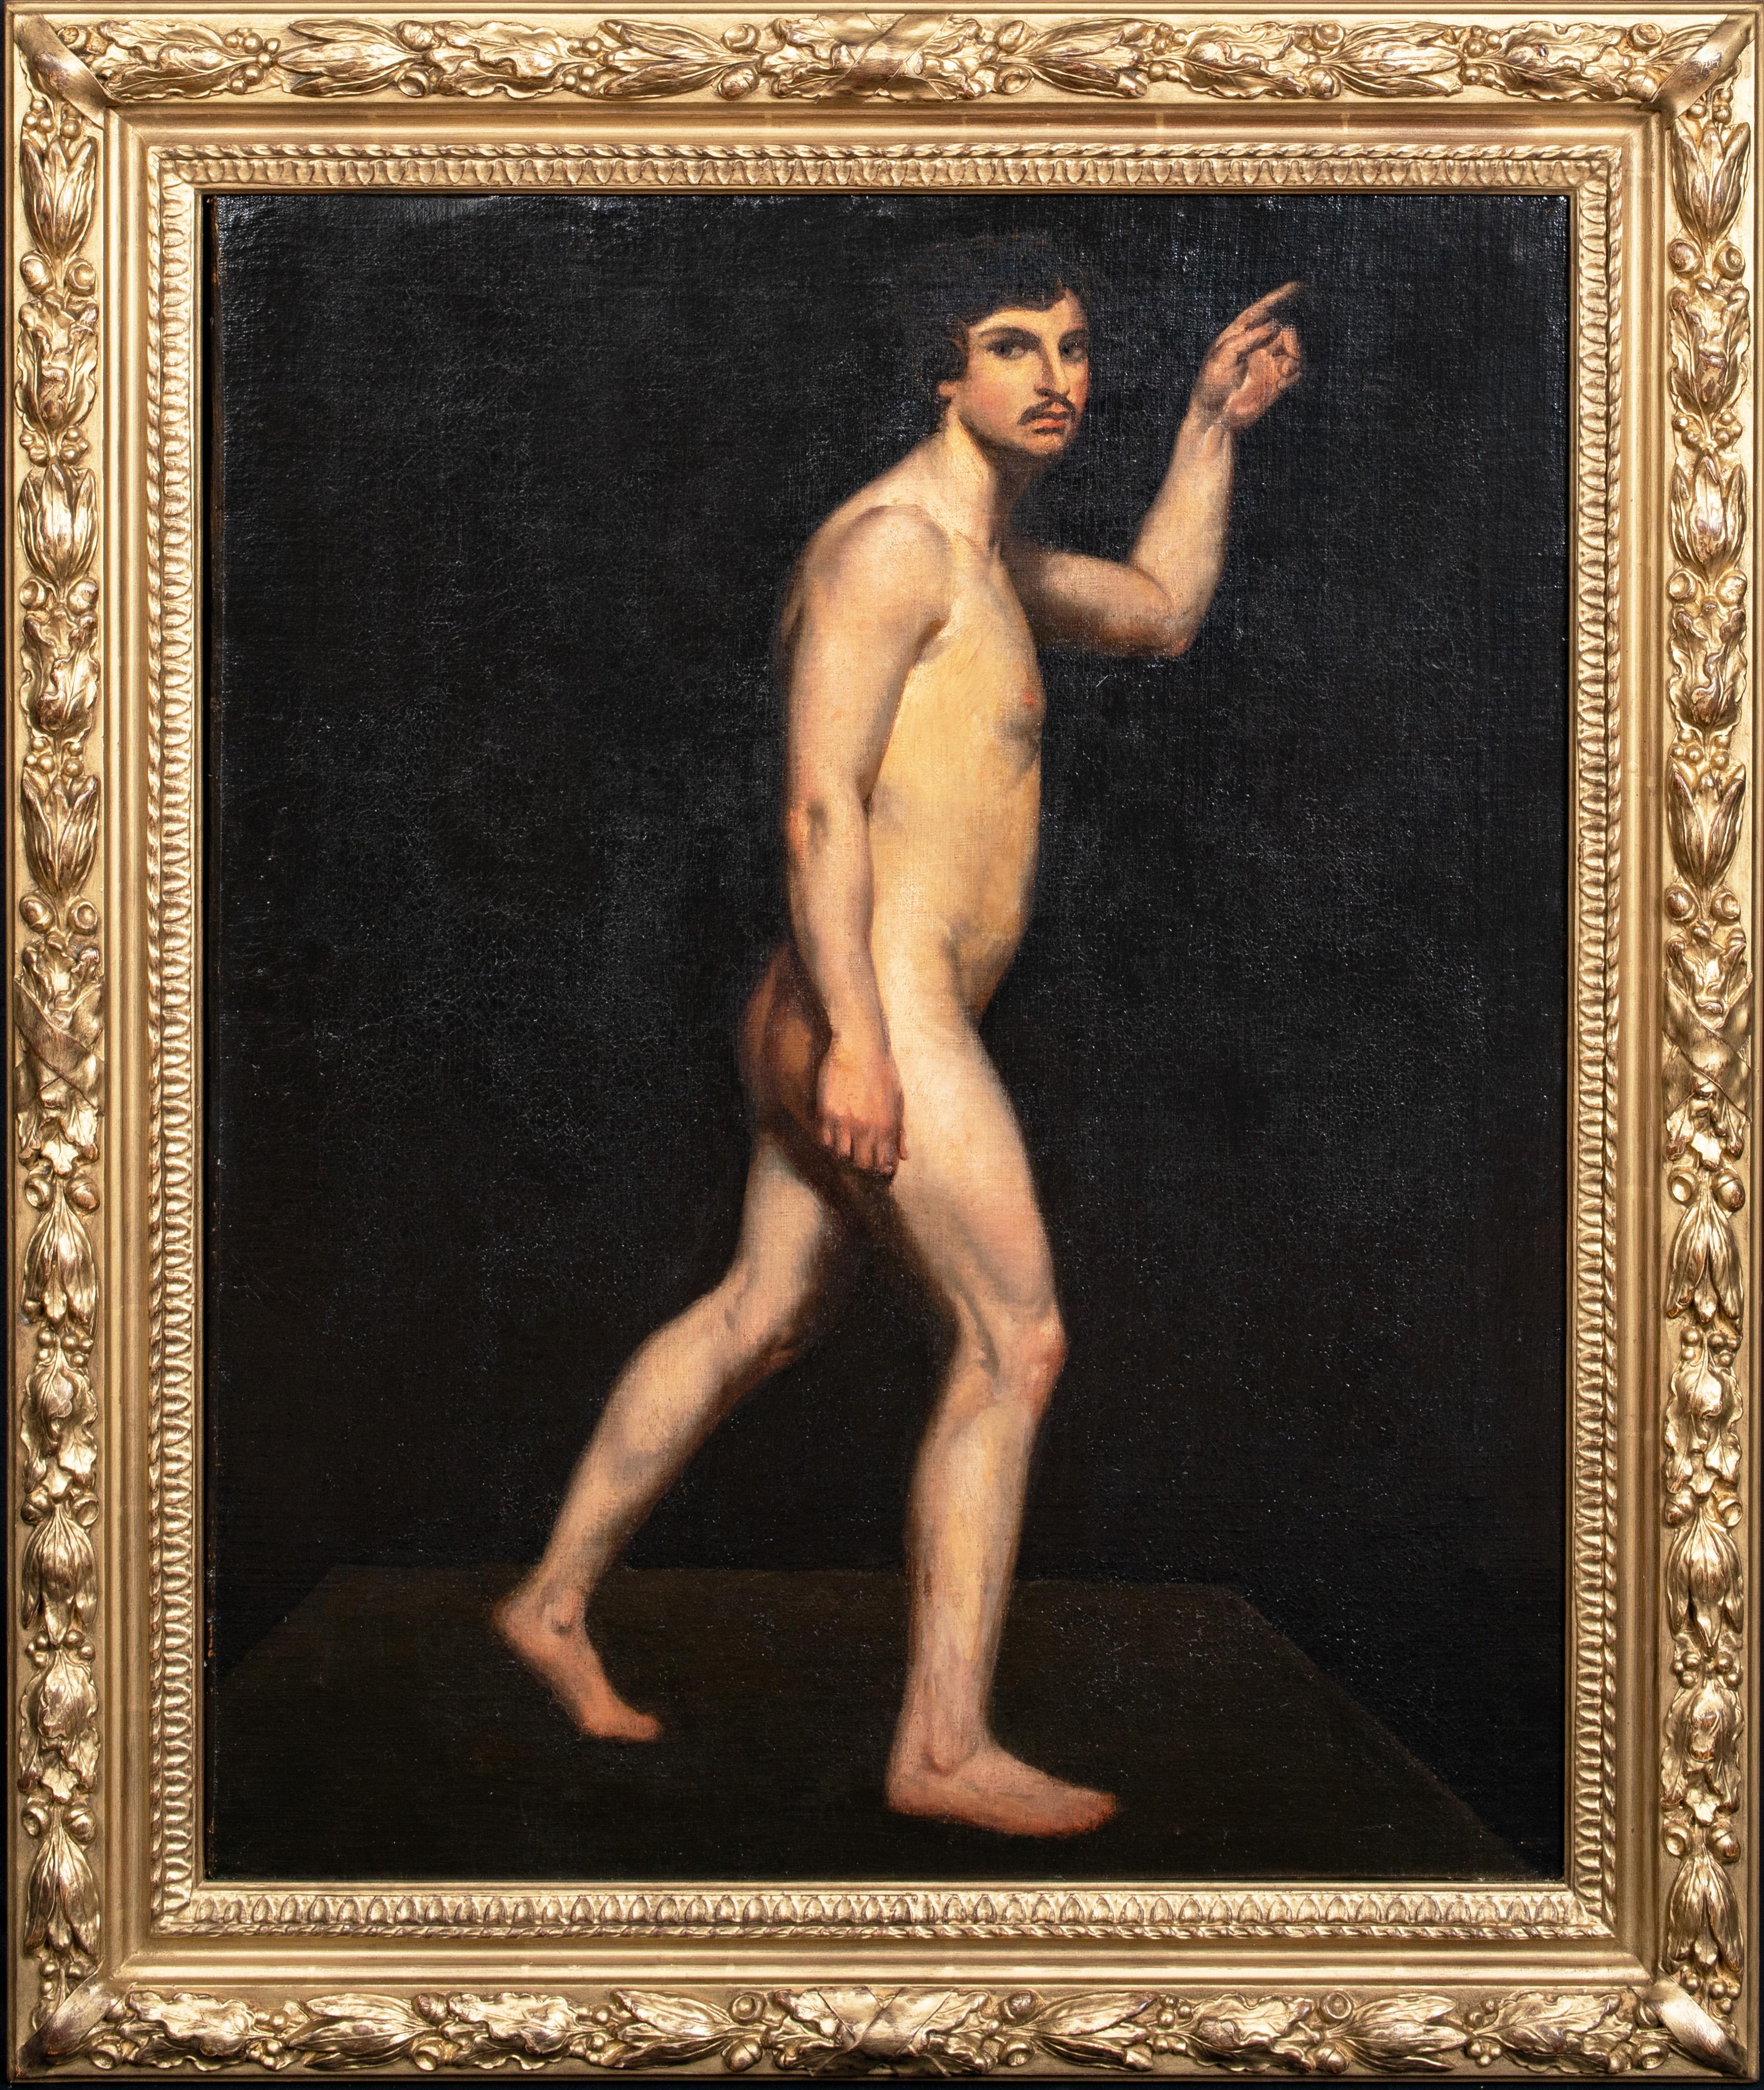 Unknown Portrait Painting - Portrait Of A Nude Male, 19th Century